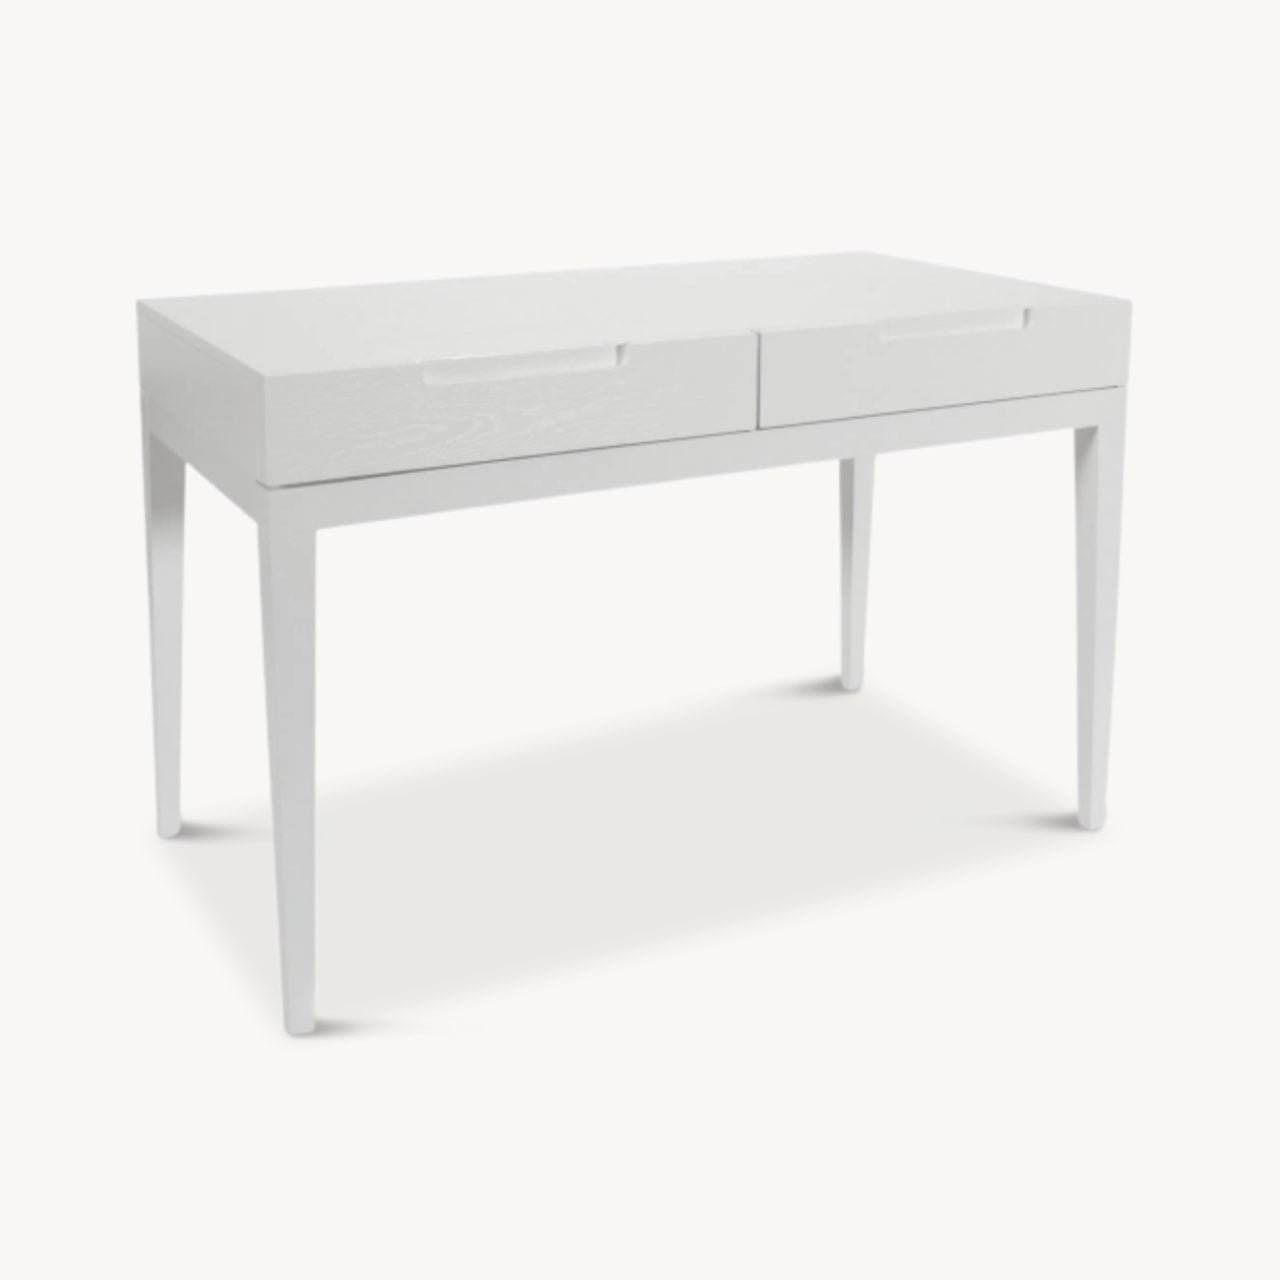 simple white dressing table or desk